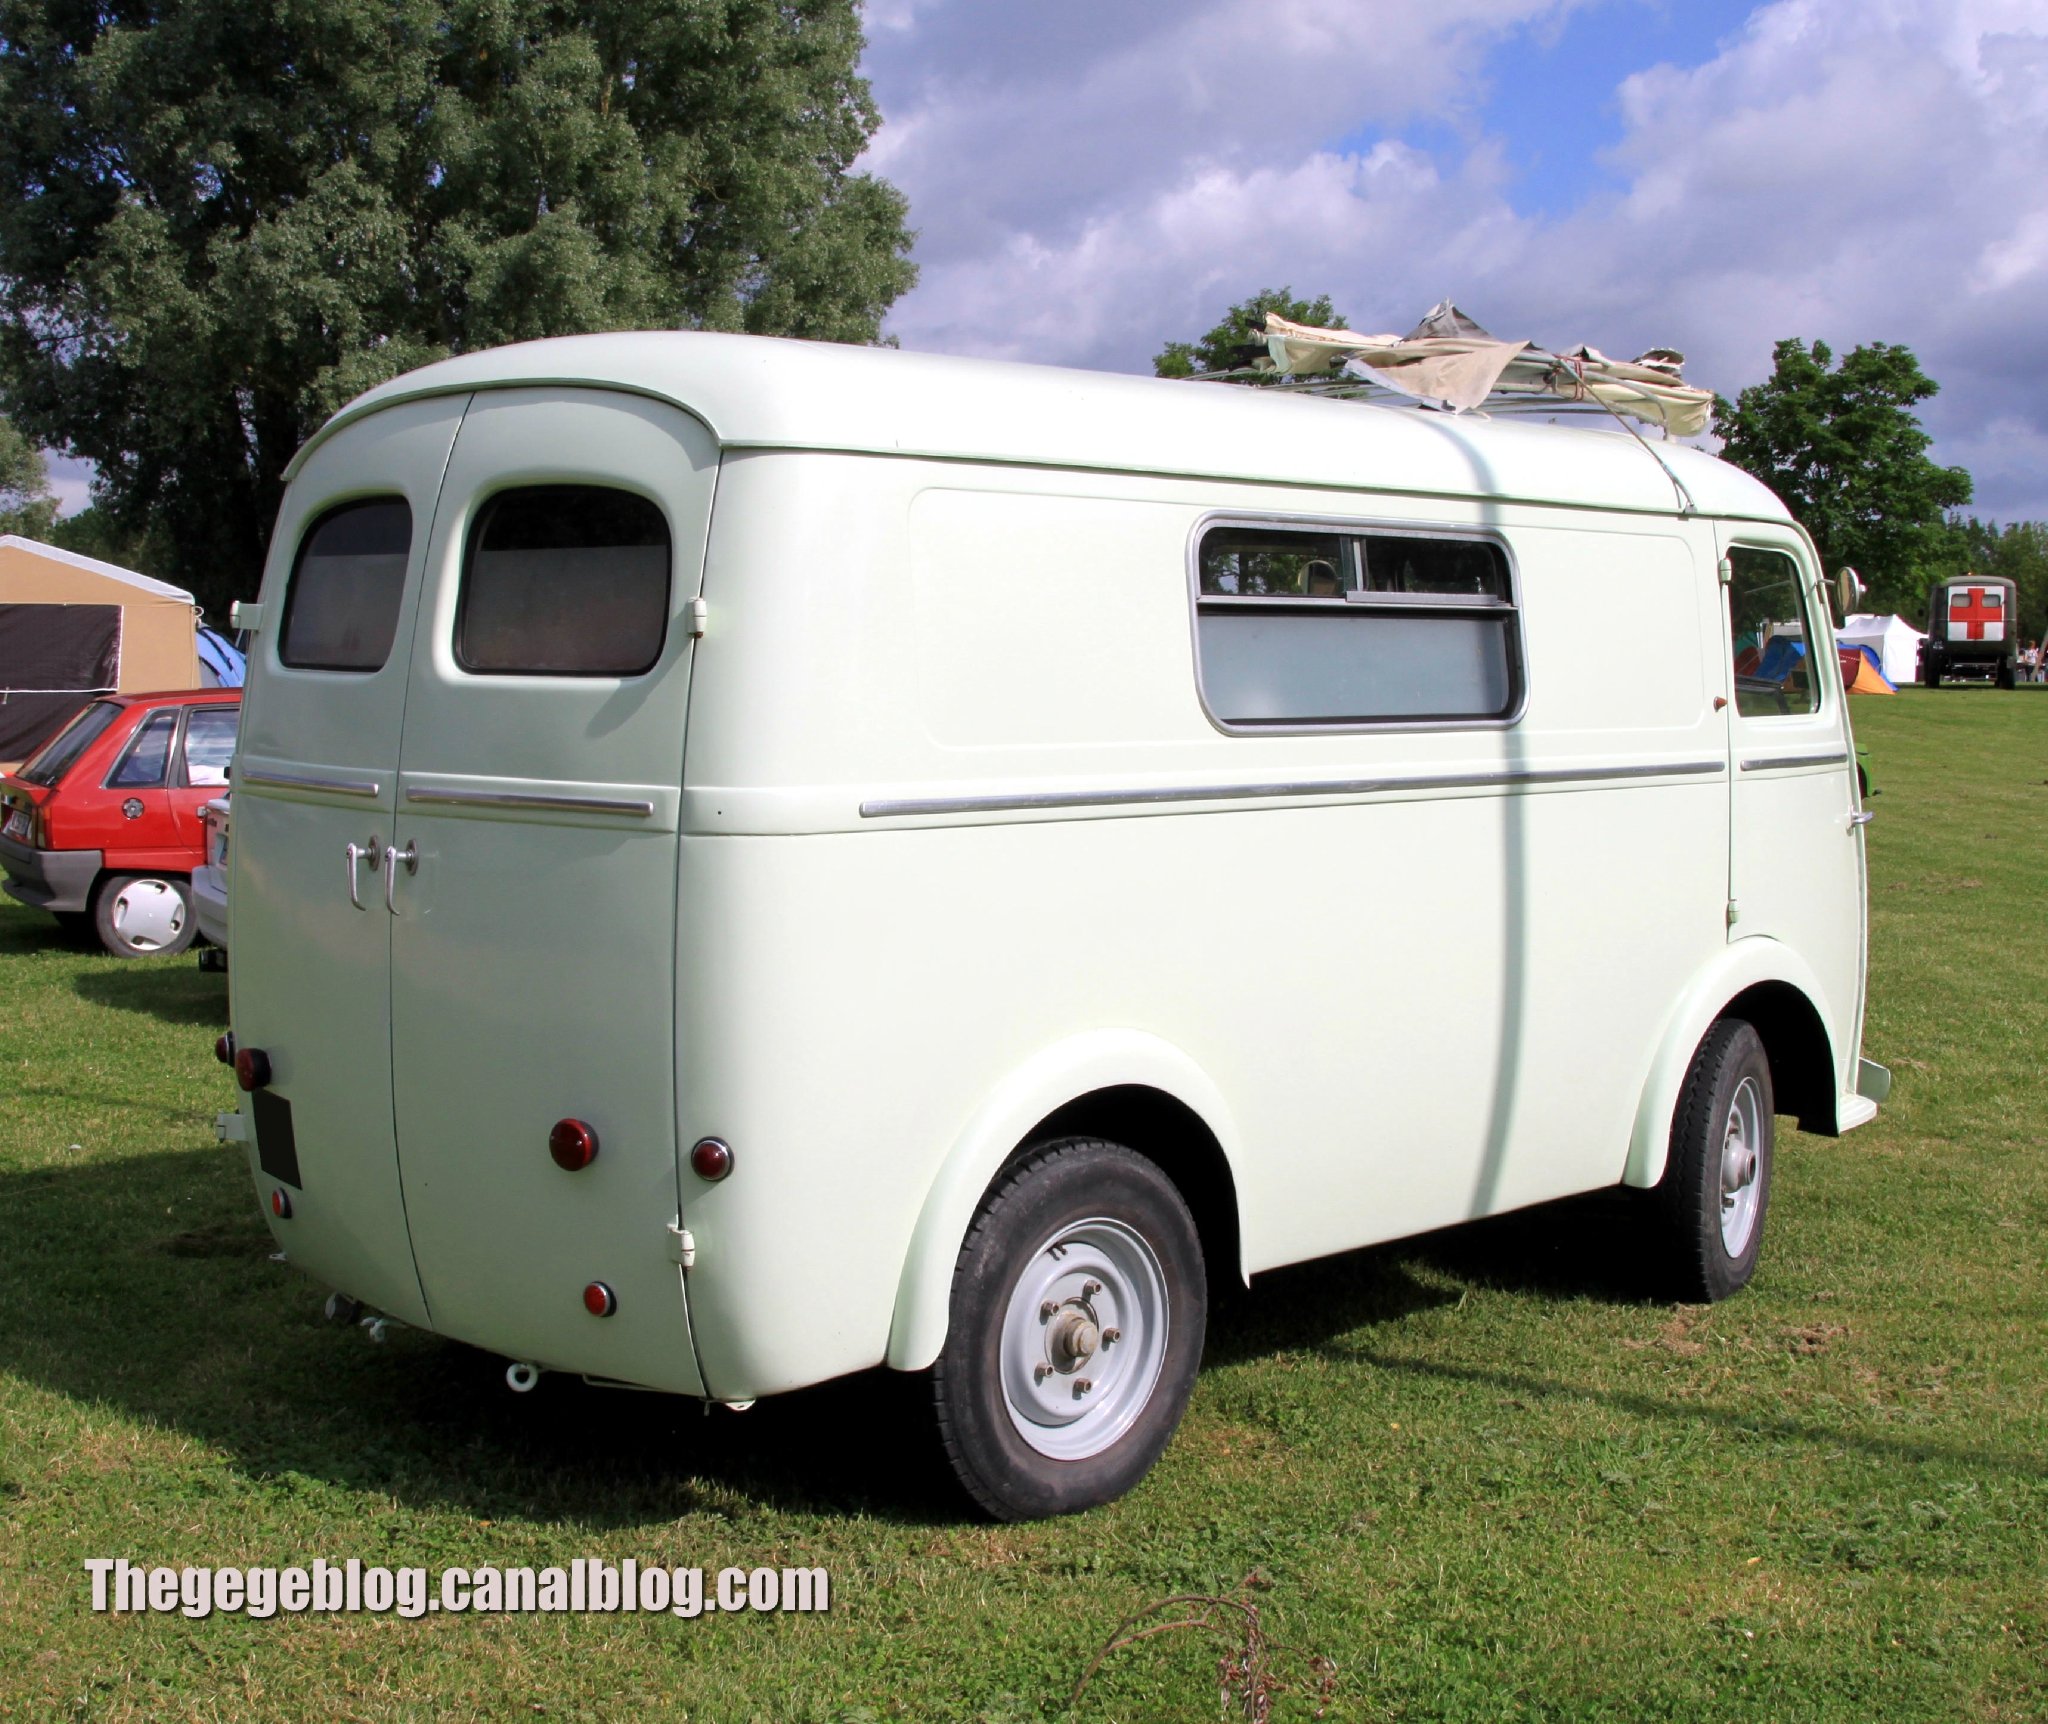 peugeot, D4a, Classic, Van, Delivery, Camionnette, French Wallpaper